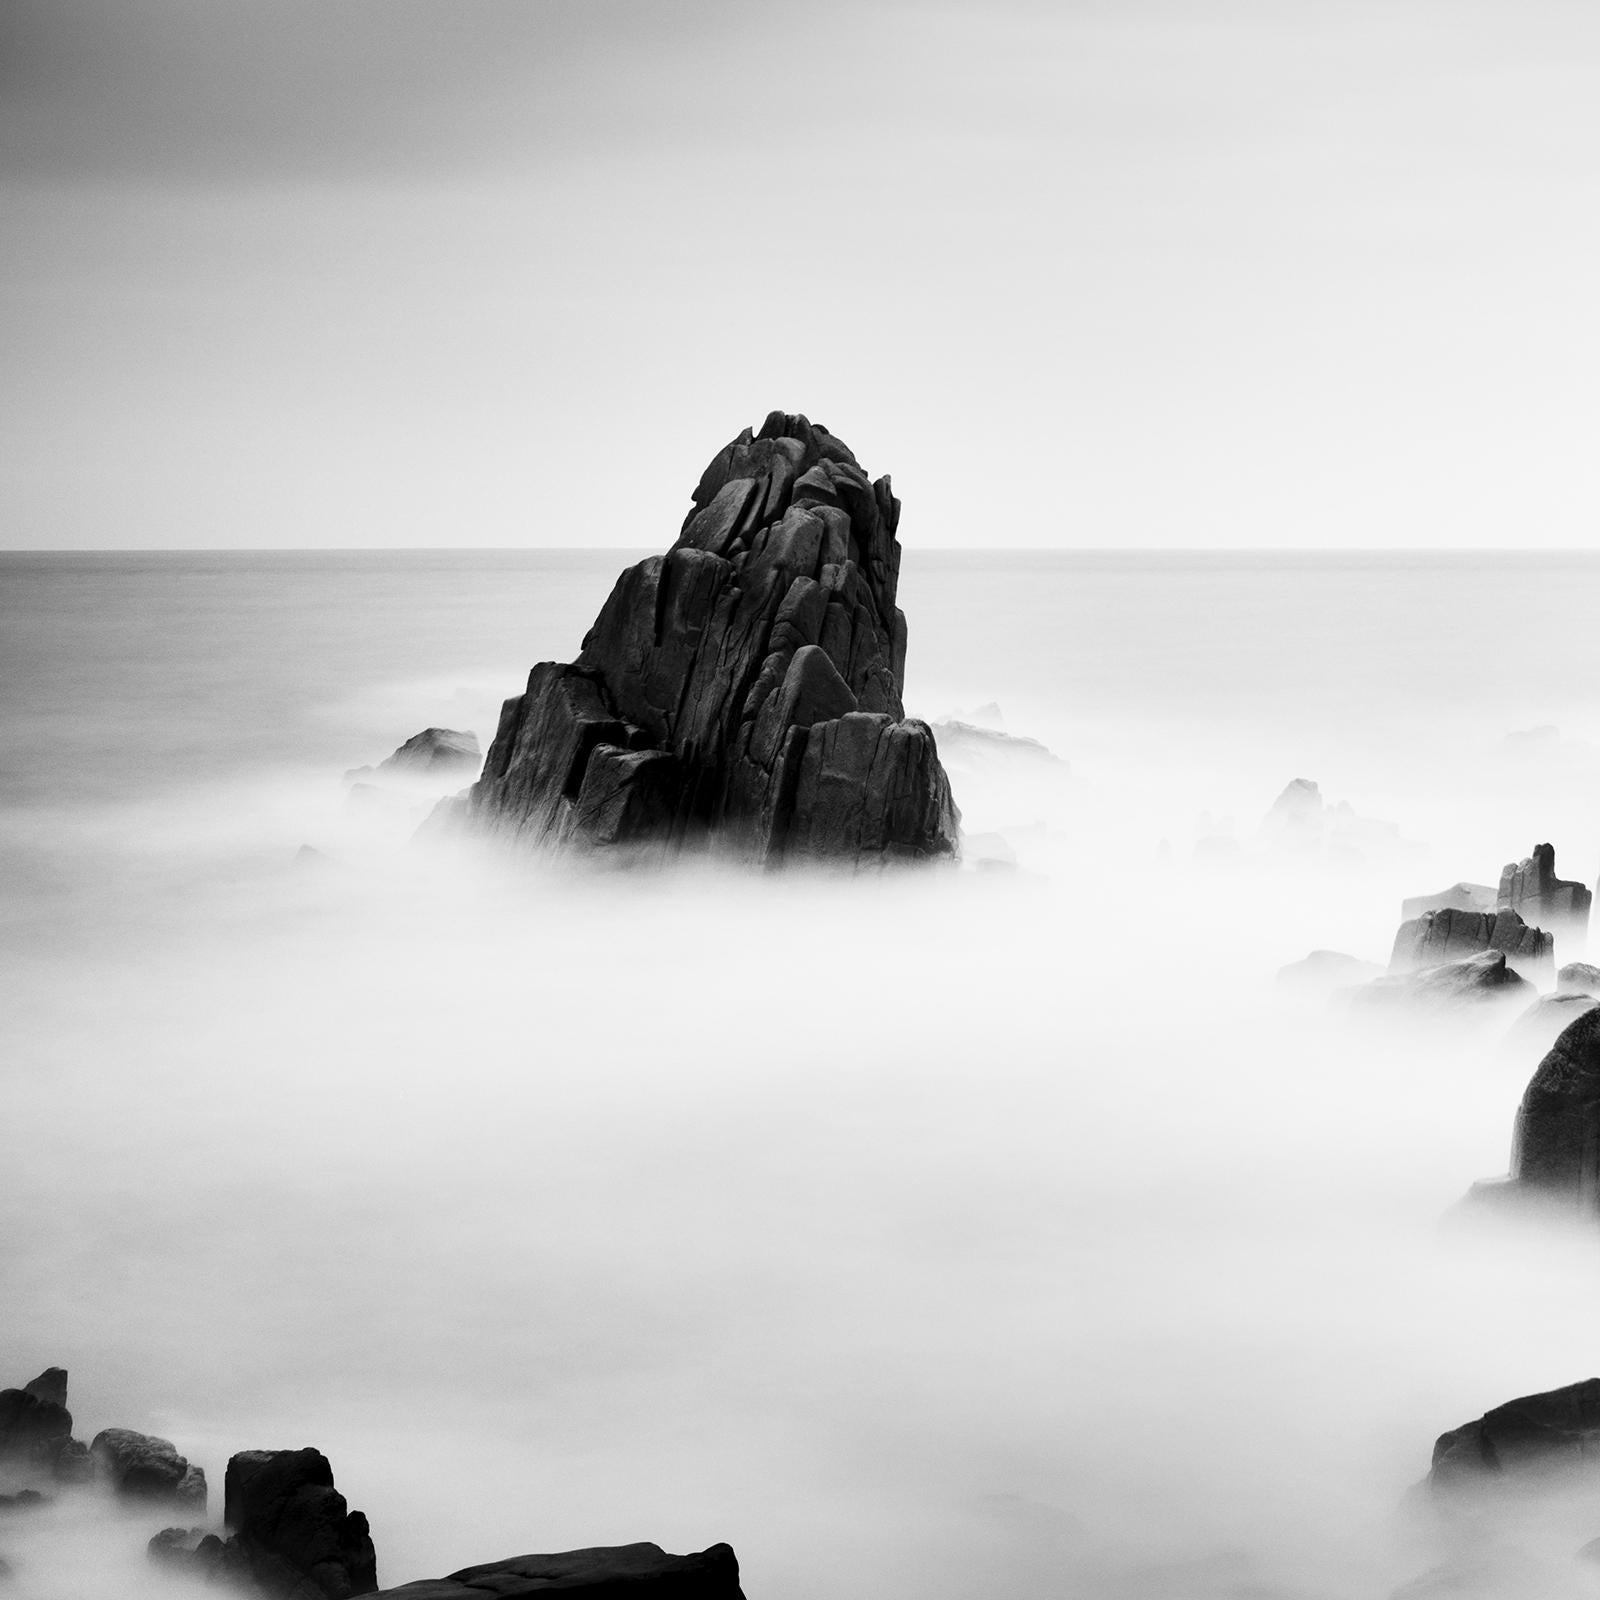 Black and white fine art long exposure seascape - landscape photography. Rocky stormy Atlantic coast of France. Archival pigment ink print, edition of 7. Signed, titled, dated and numbered by artist. Certificate of authenticity included. Printed